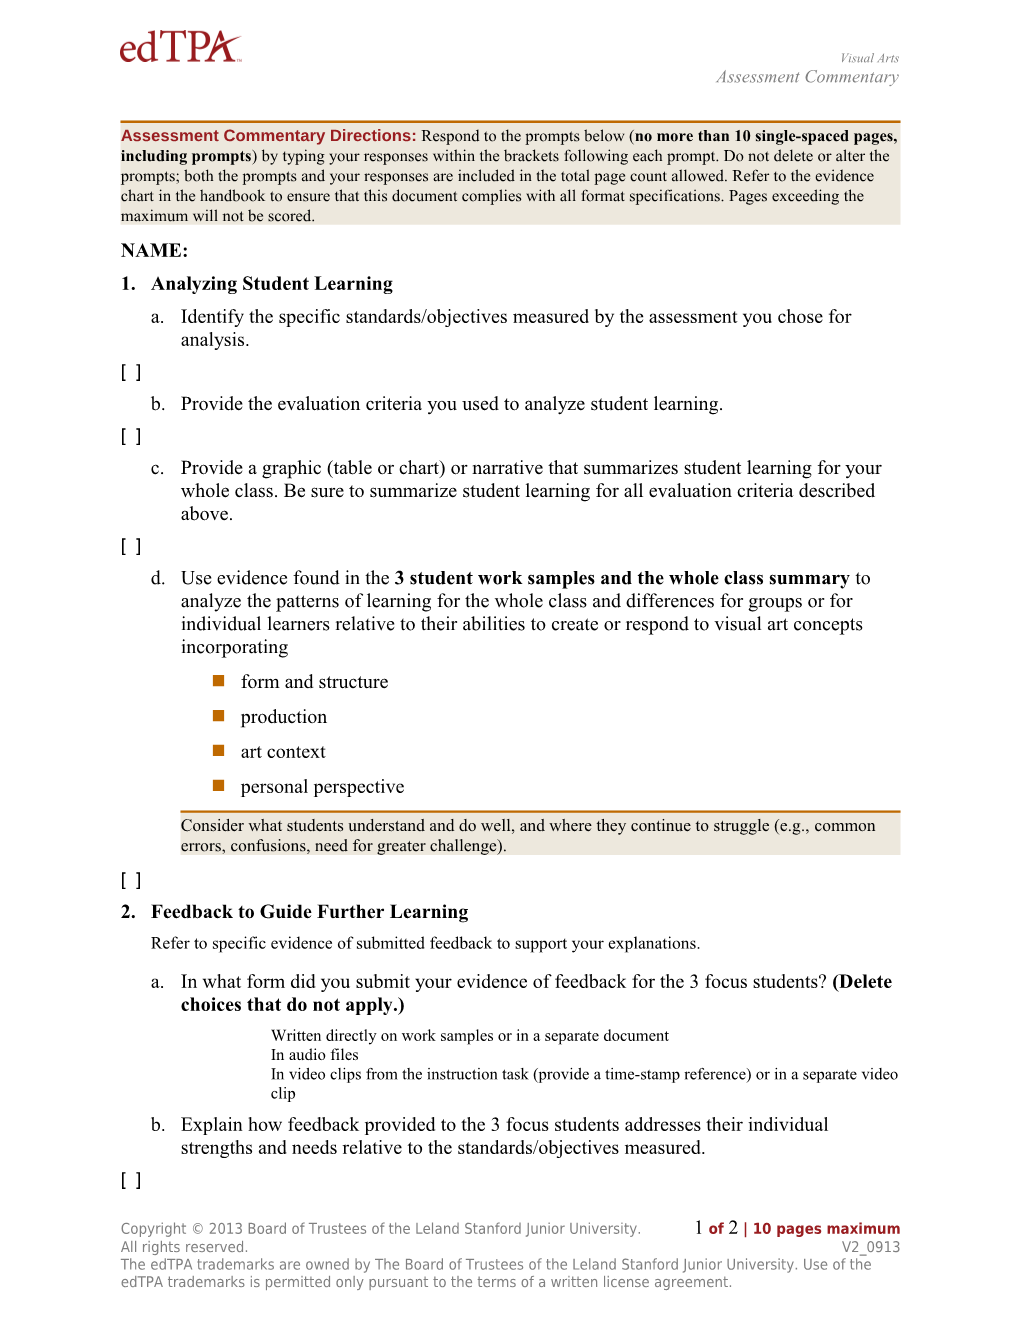 Assessment Commentary Template